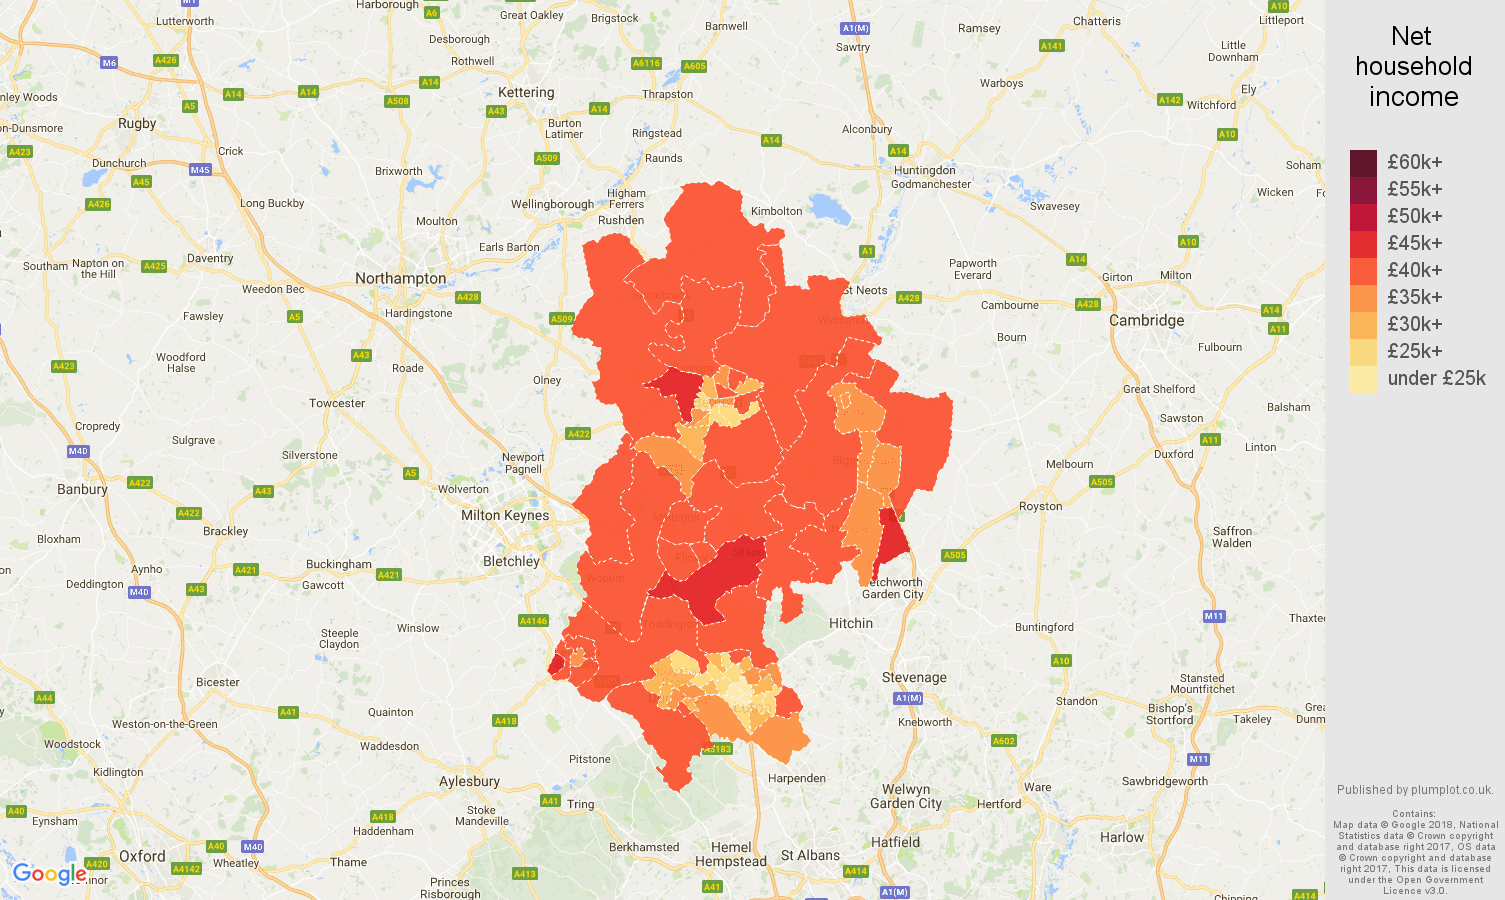 Bedfordshire net household income map